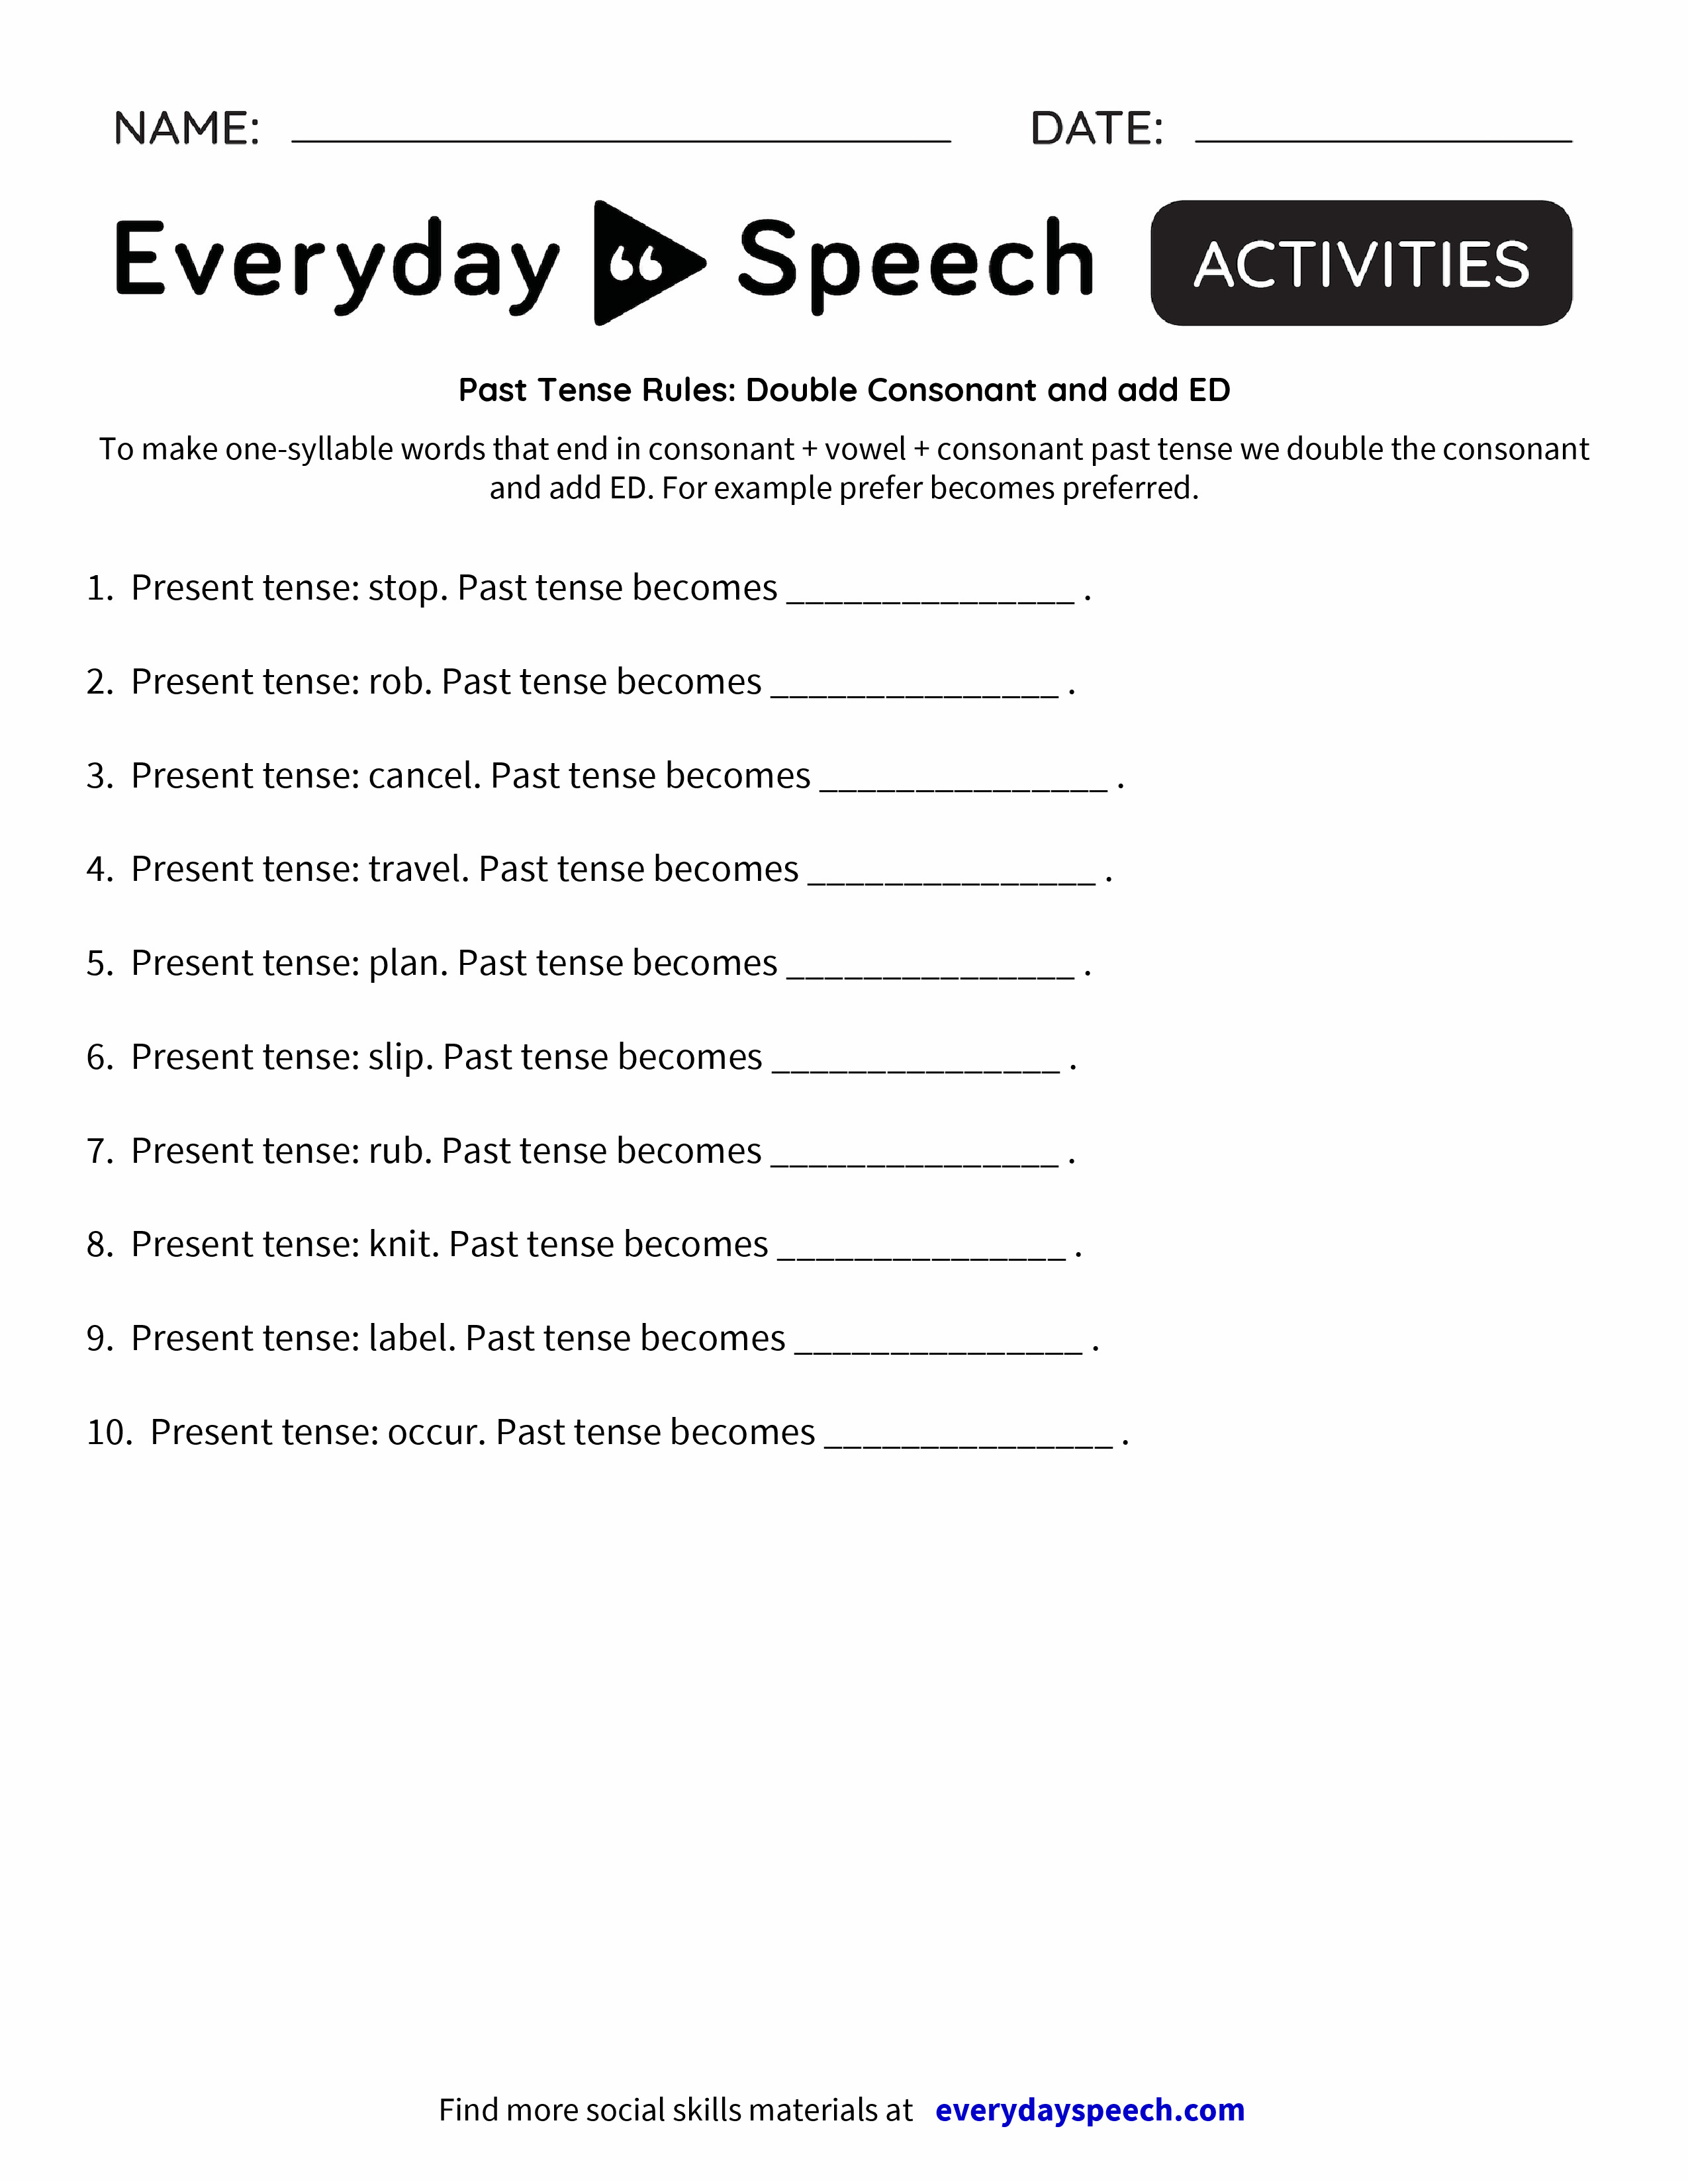 Past Tense Rules Double Consonant And Add ED Everyday Speech Everyday Speech